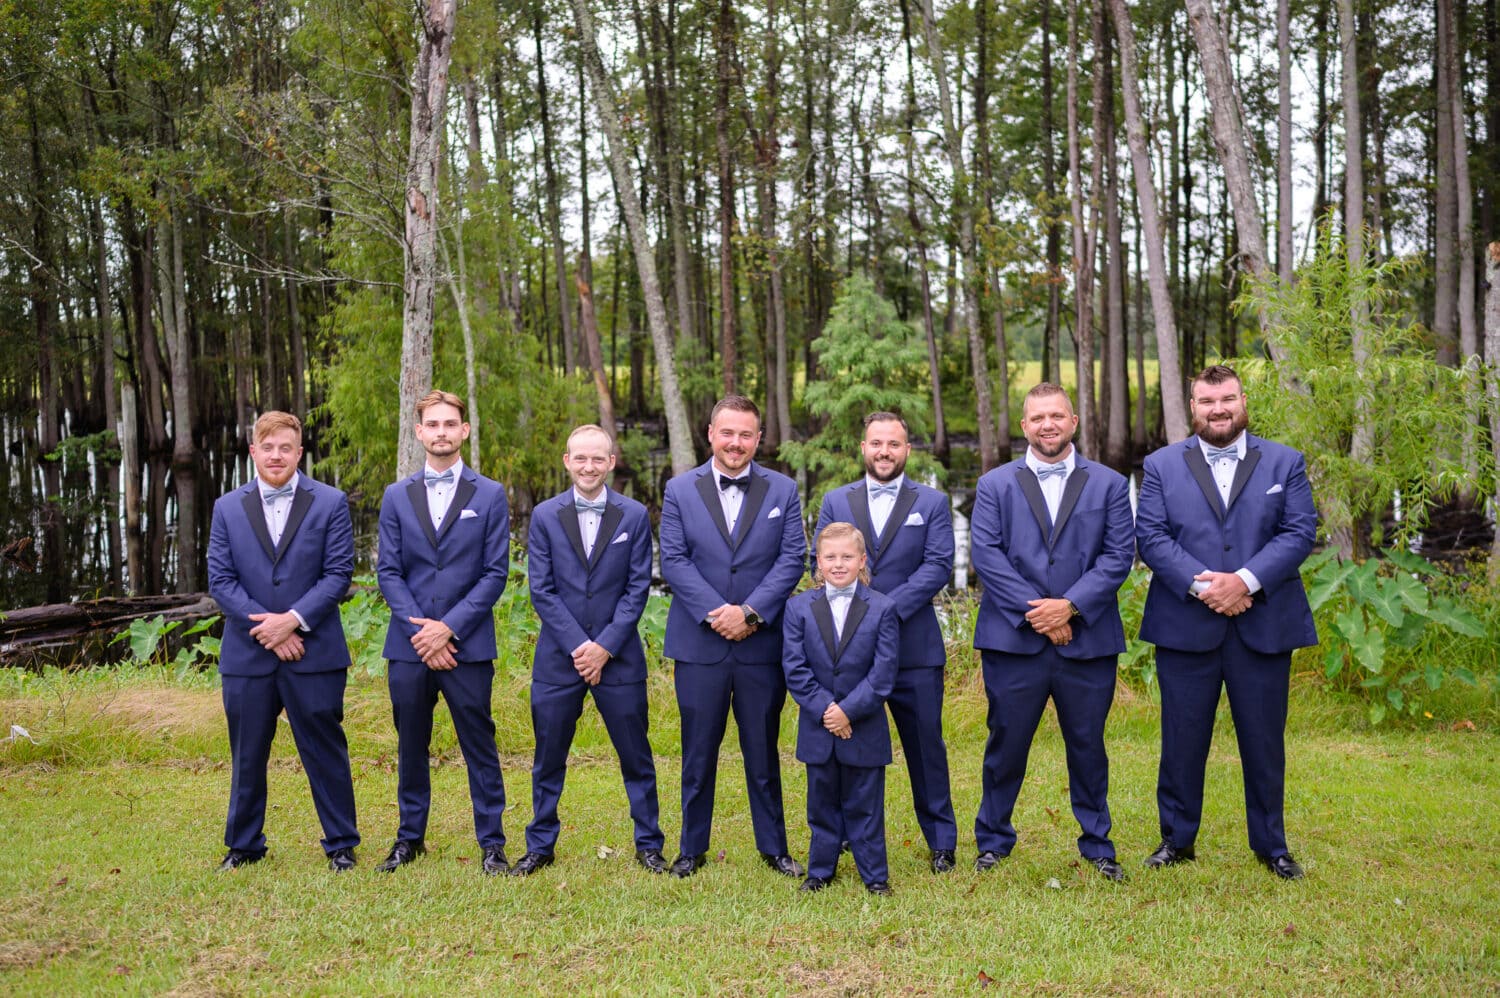 Groom with groomsmen before the ceremony - Wildhorse at Parker Farms